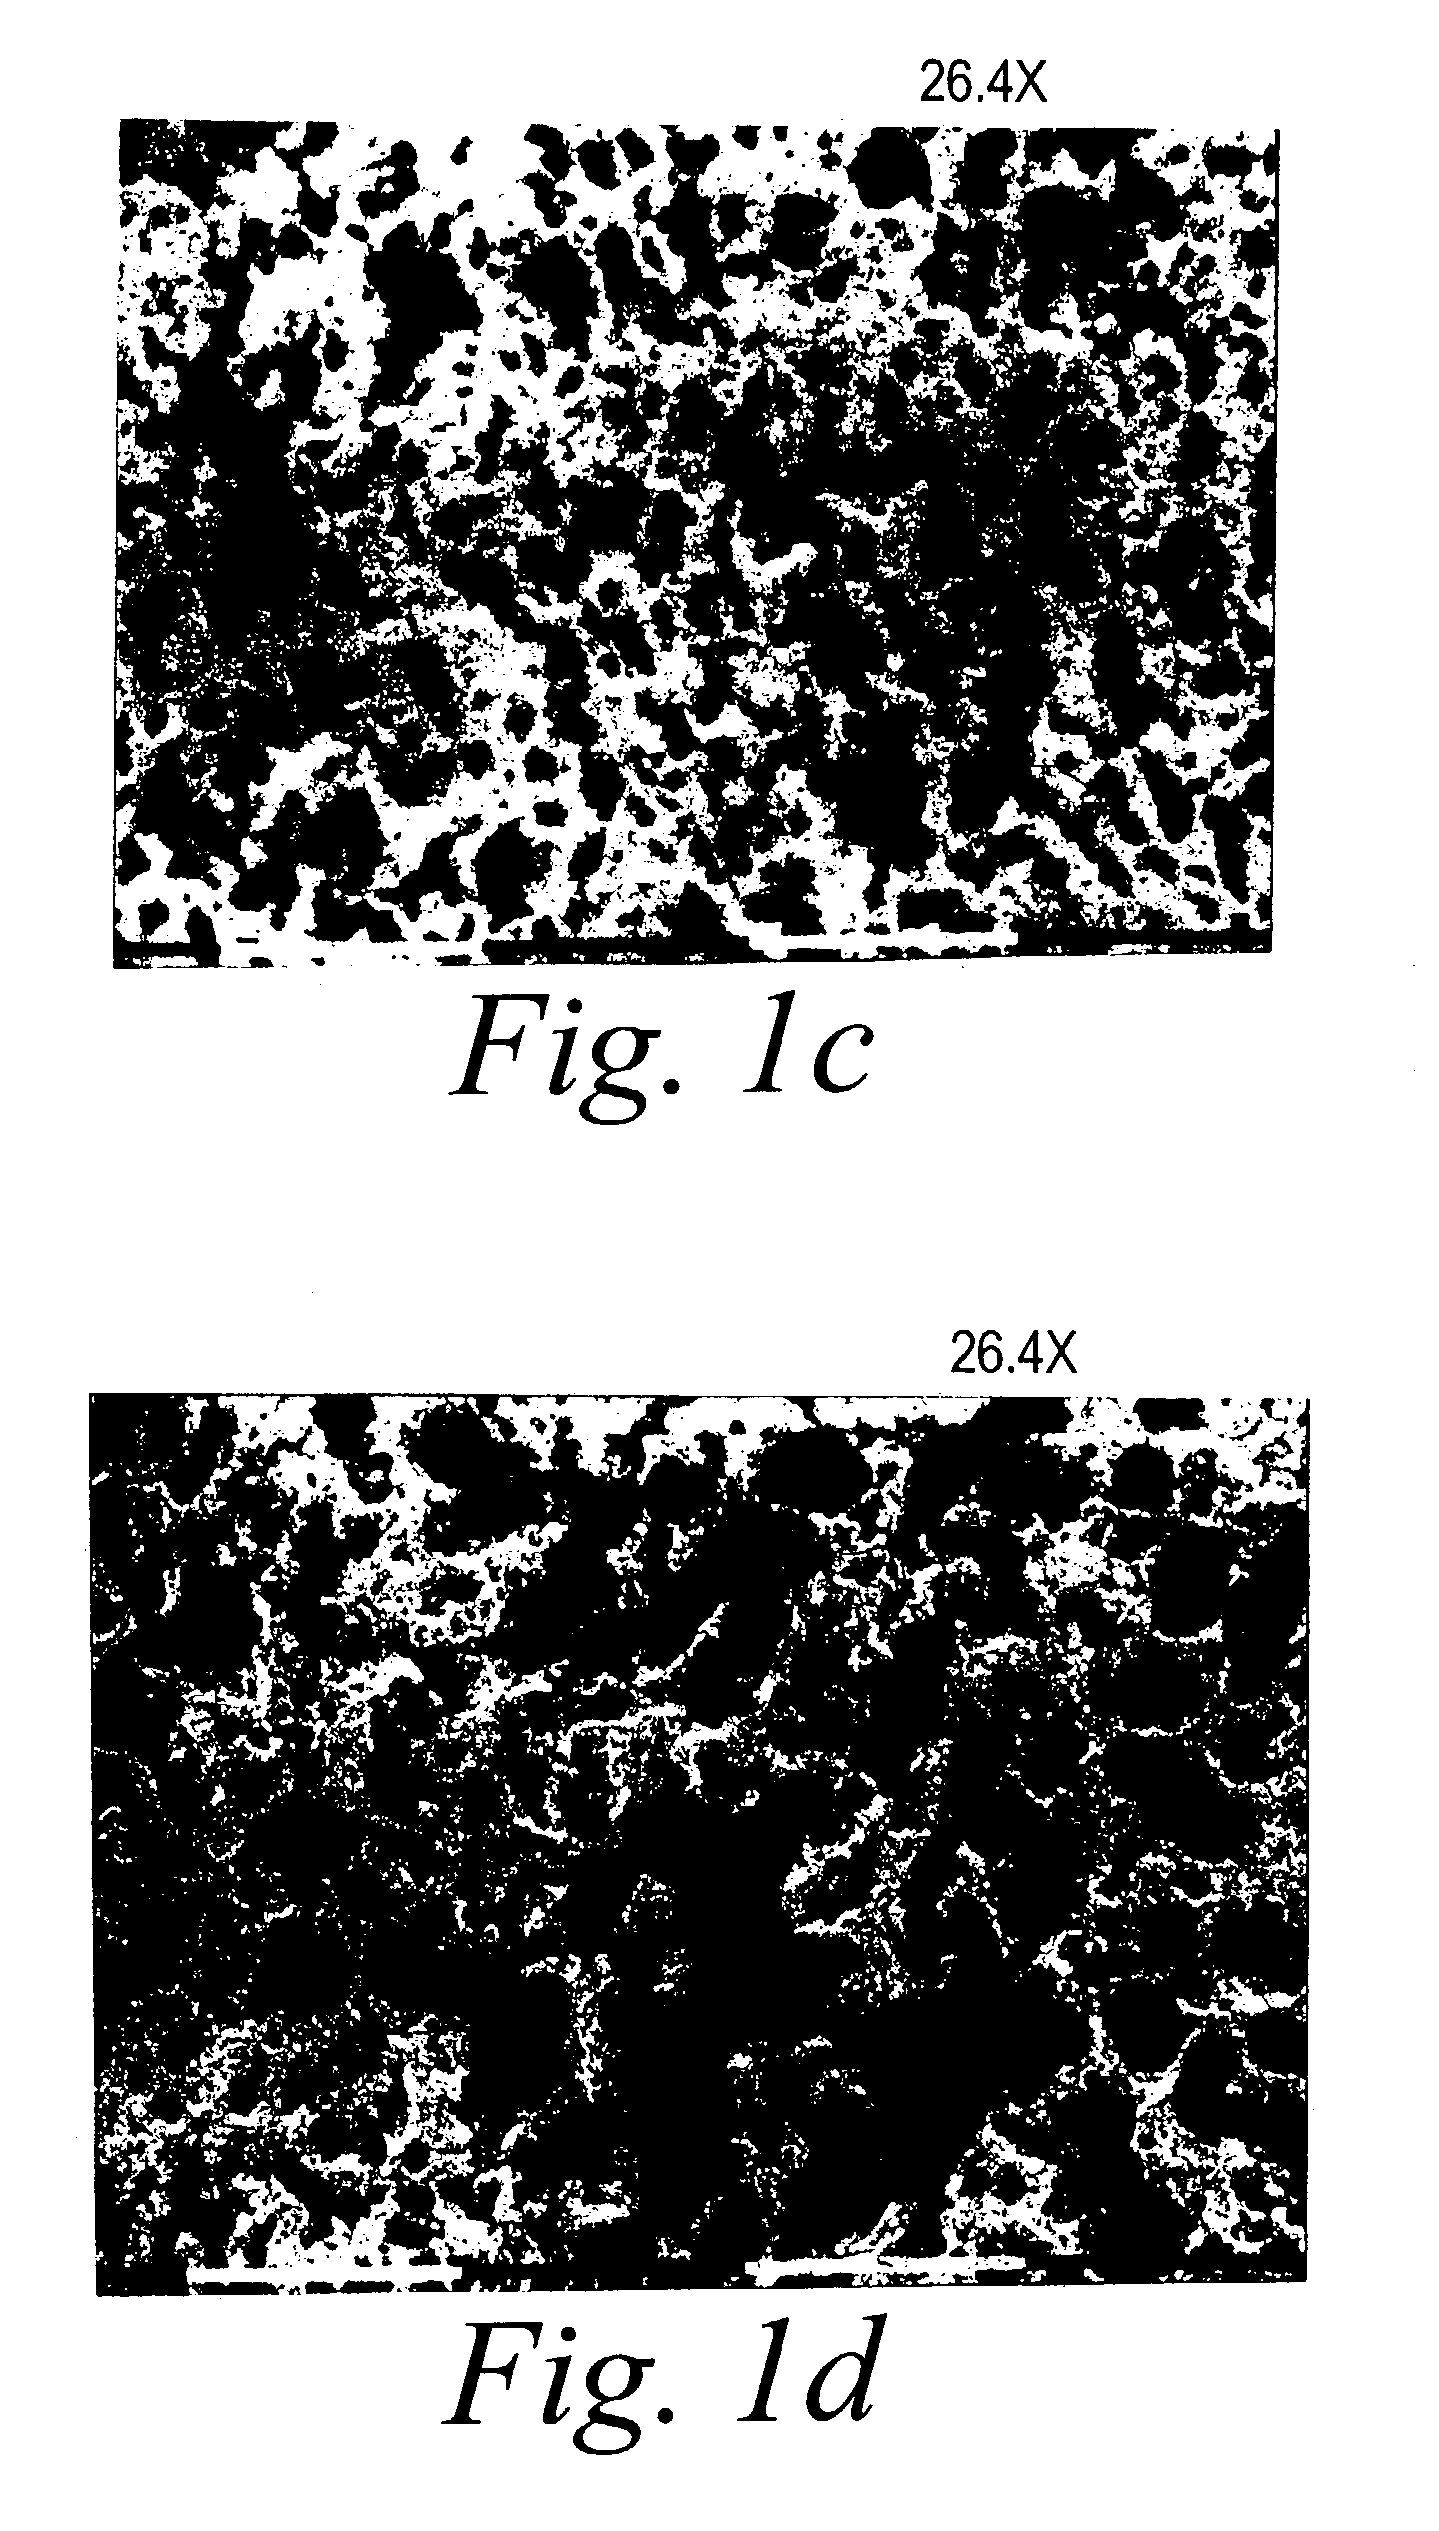 Calcium phosphate bone replacement materials and methods of use thereof